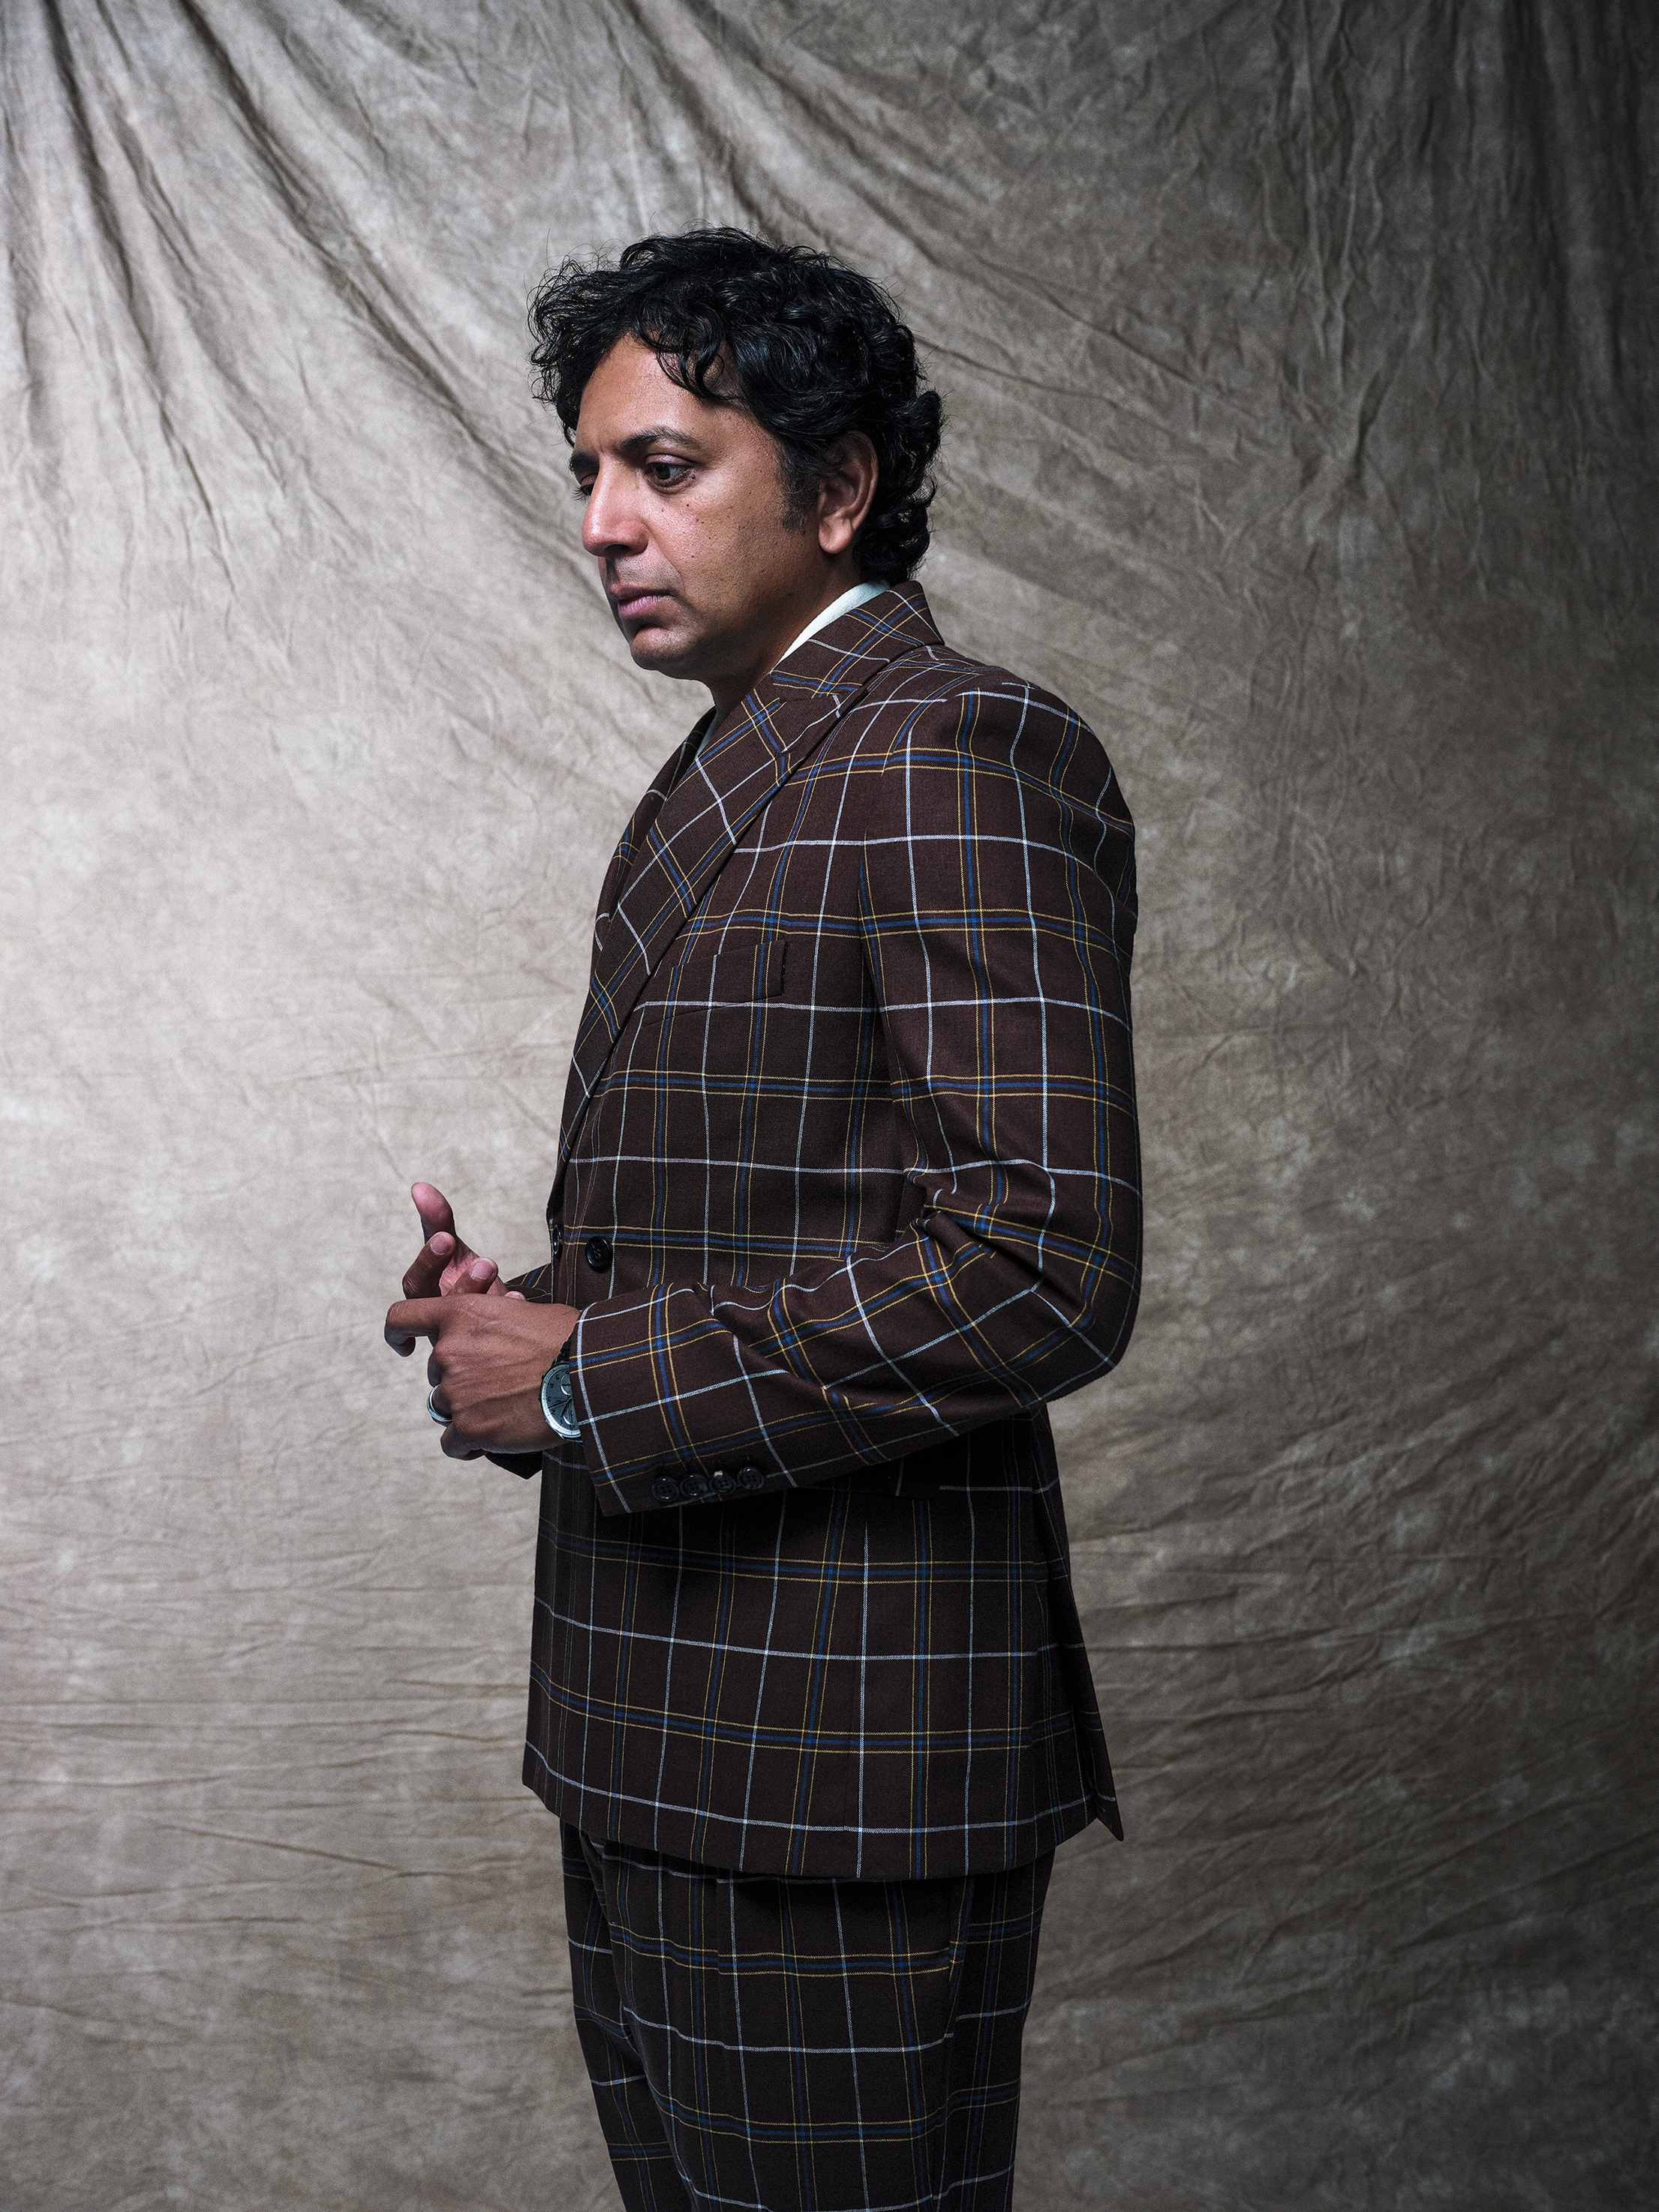 portrait of M. Night Shyamalan standing, looking down with hands clasped, wearing brown plaid suit